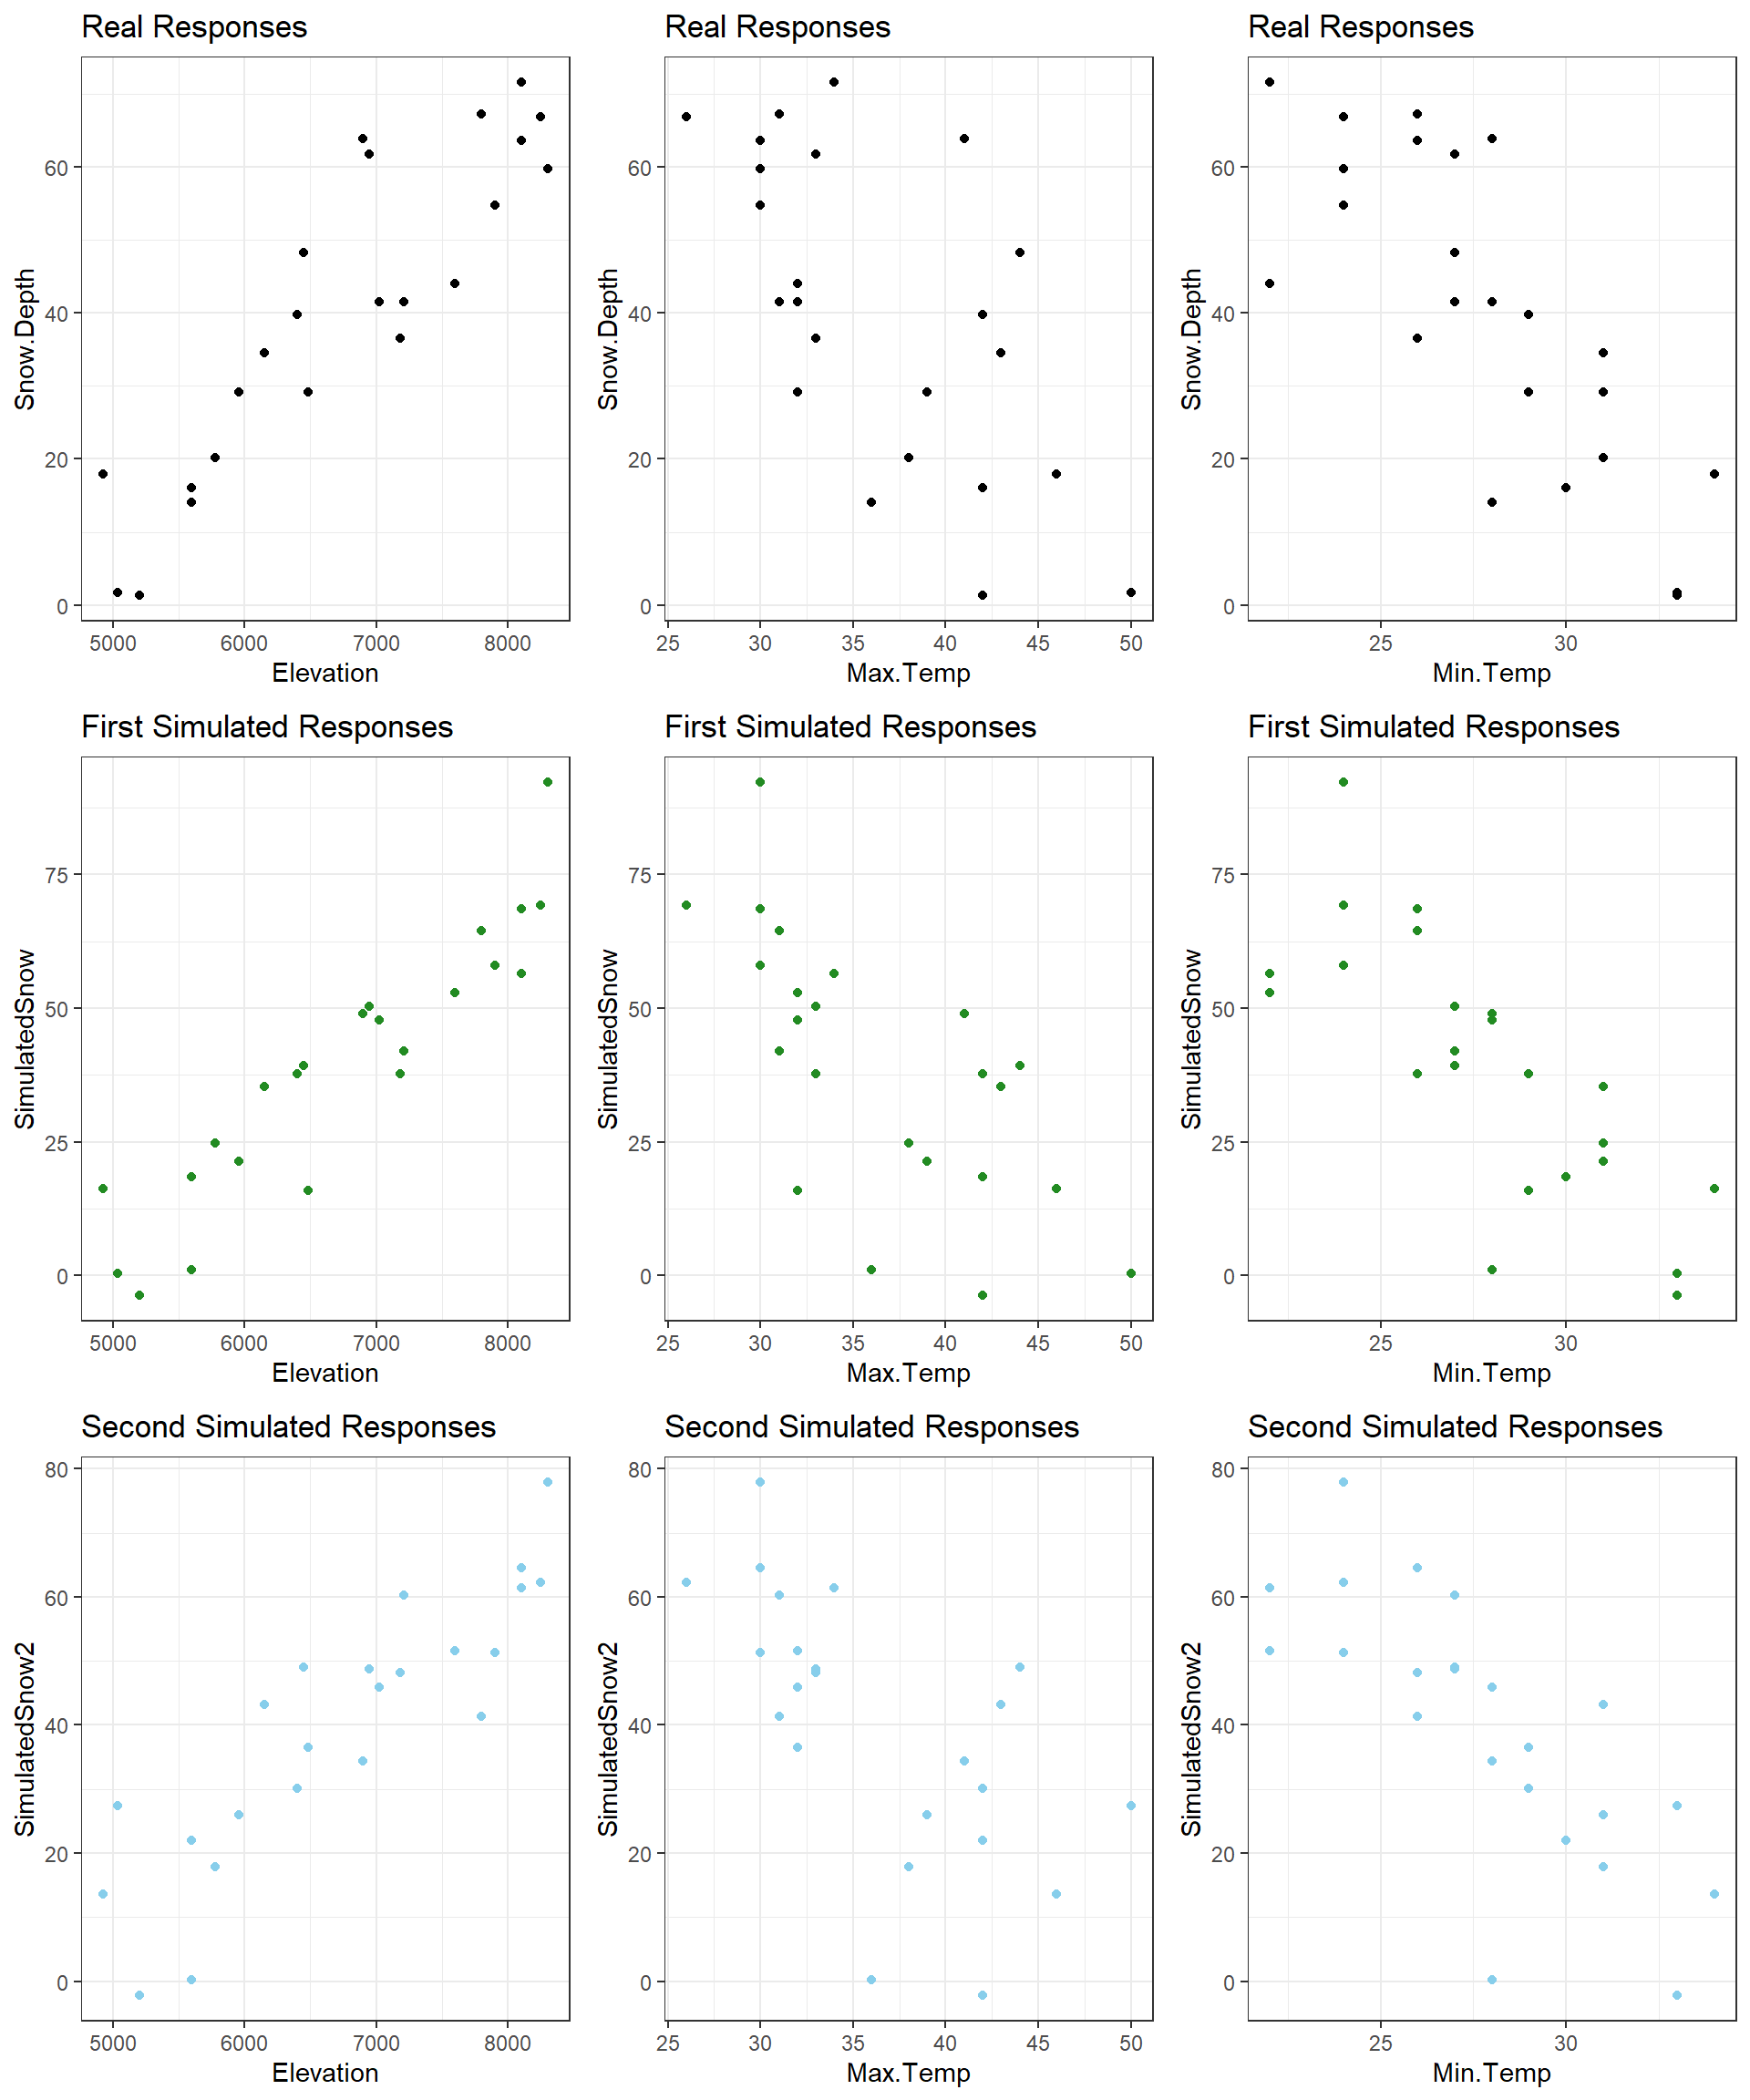 Plot of the original responses versus the three predictors (\(n\) = 23 data set) in the top row and two sets of simulated responses versus the predictors in the bottom two rows.